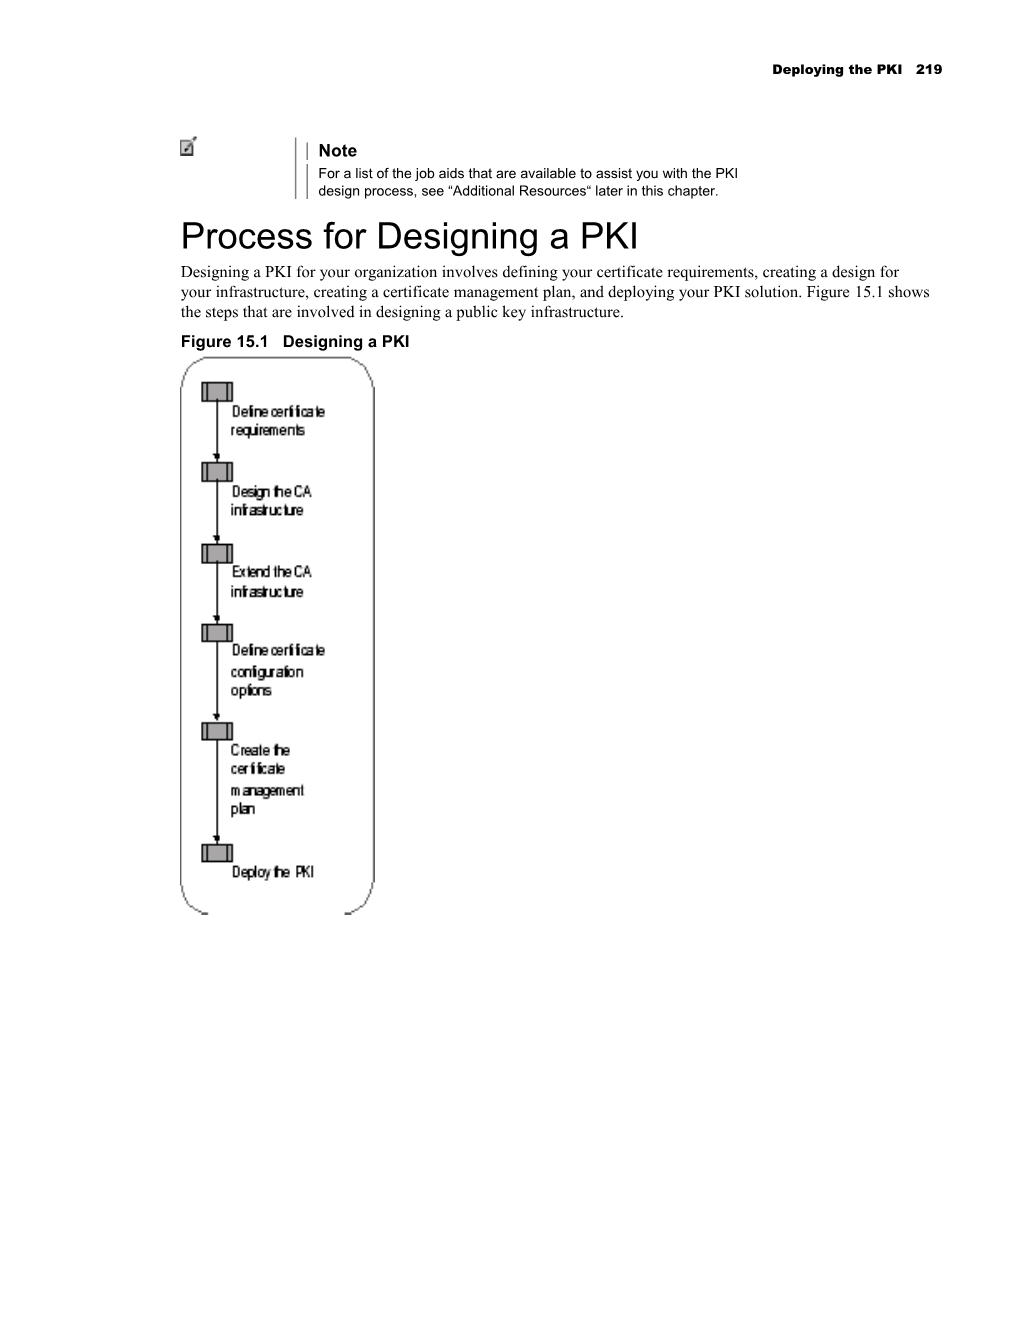 20 CHAPTER 16 Designing a Public Key Infrastructure